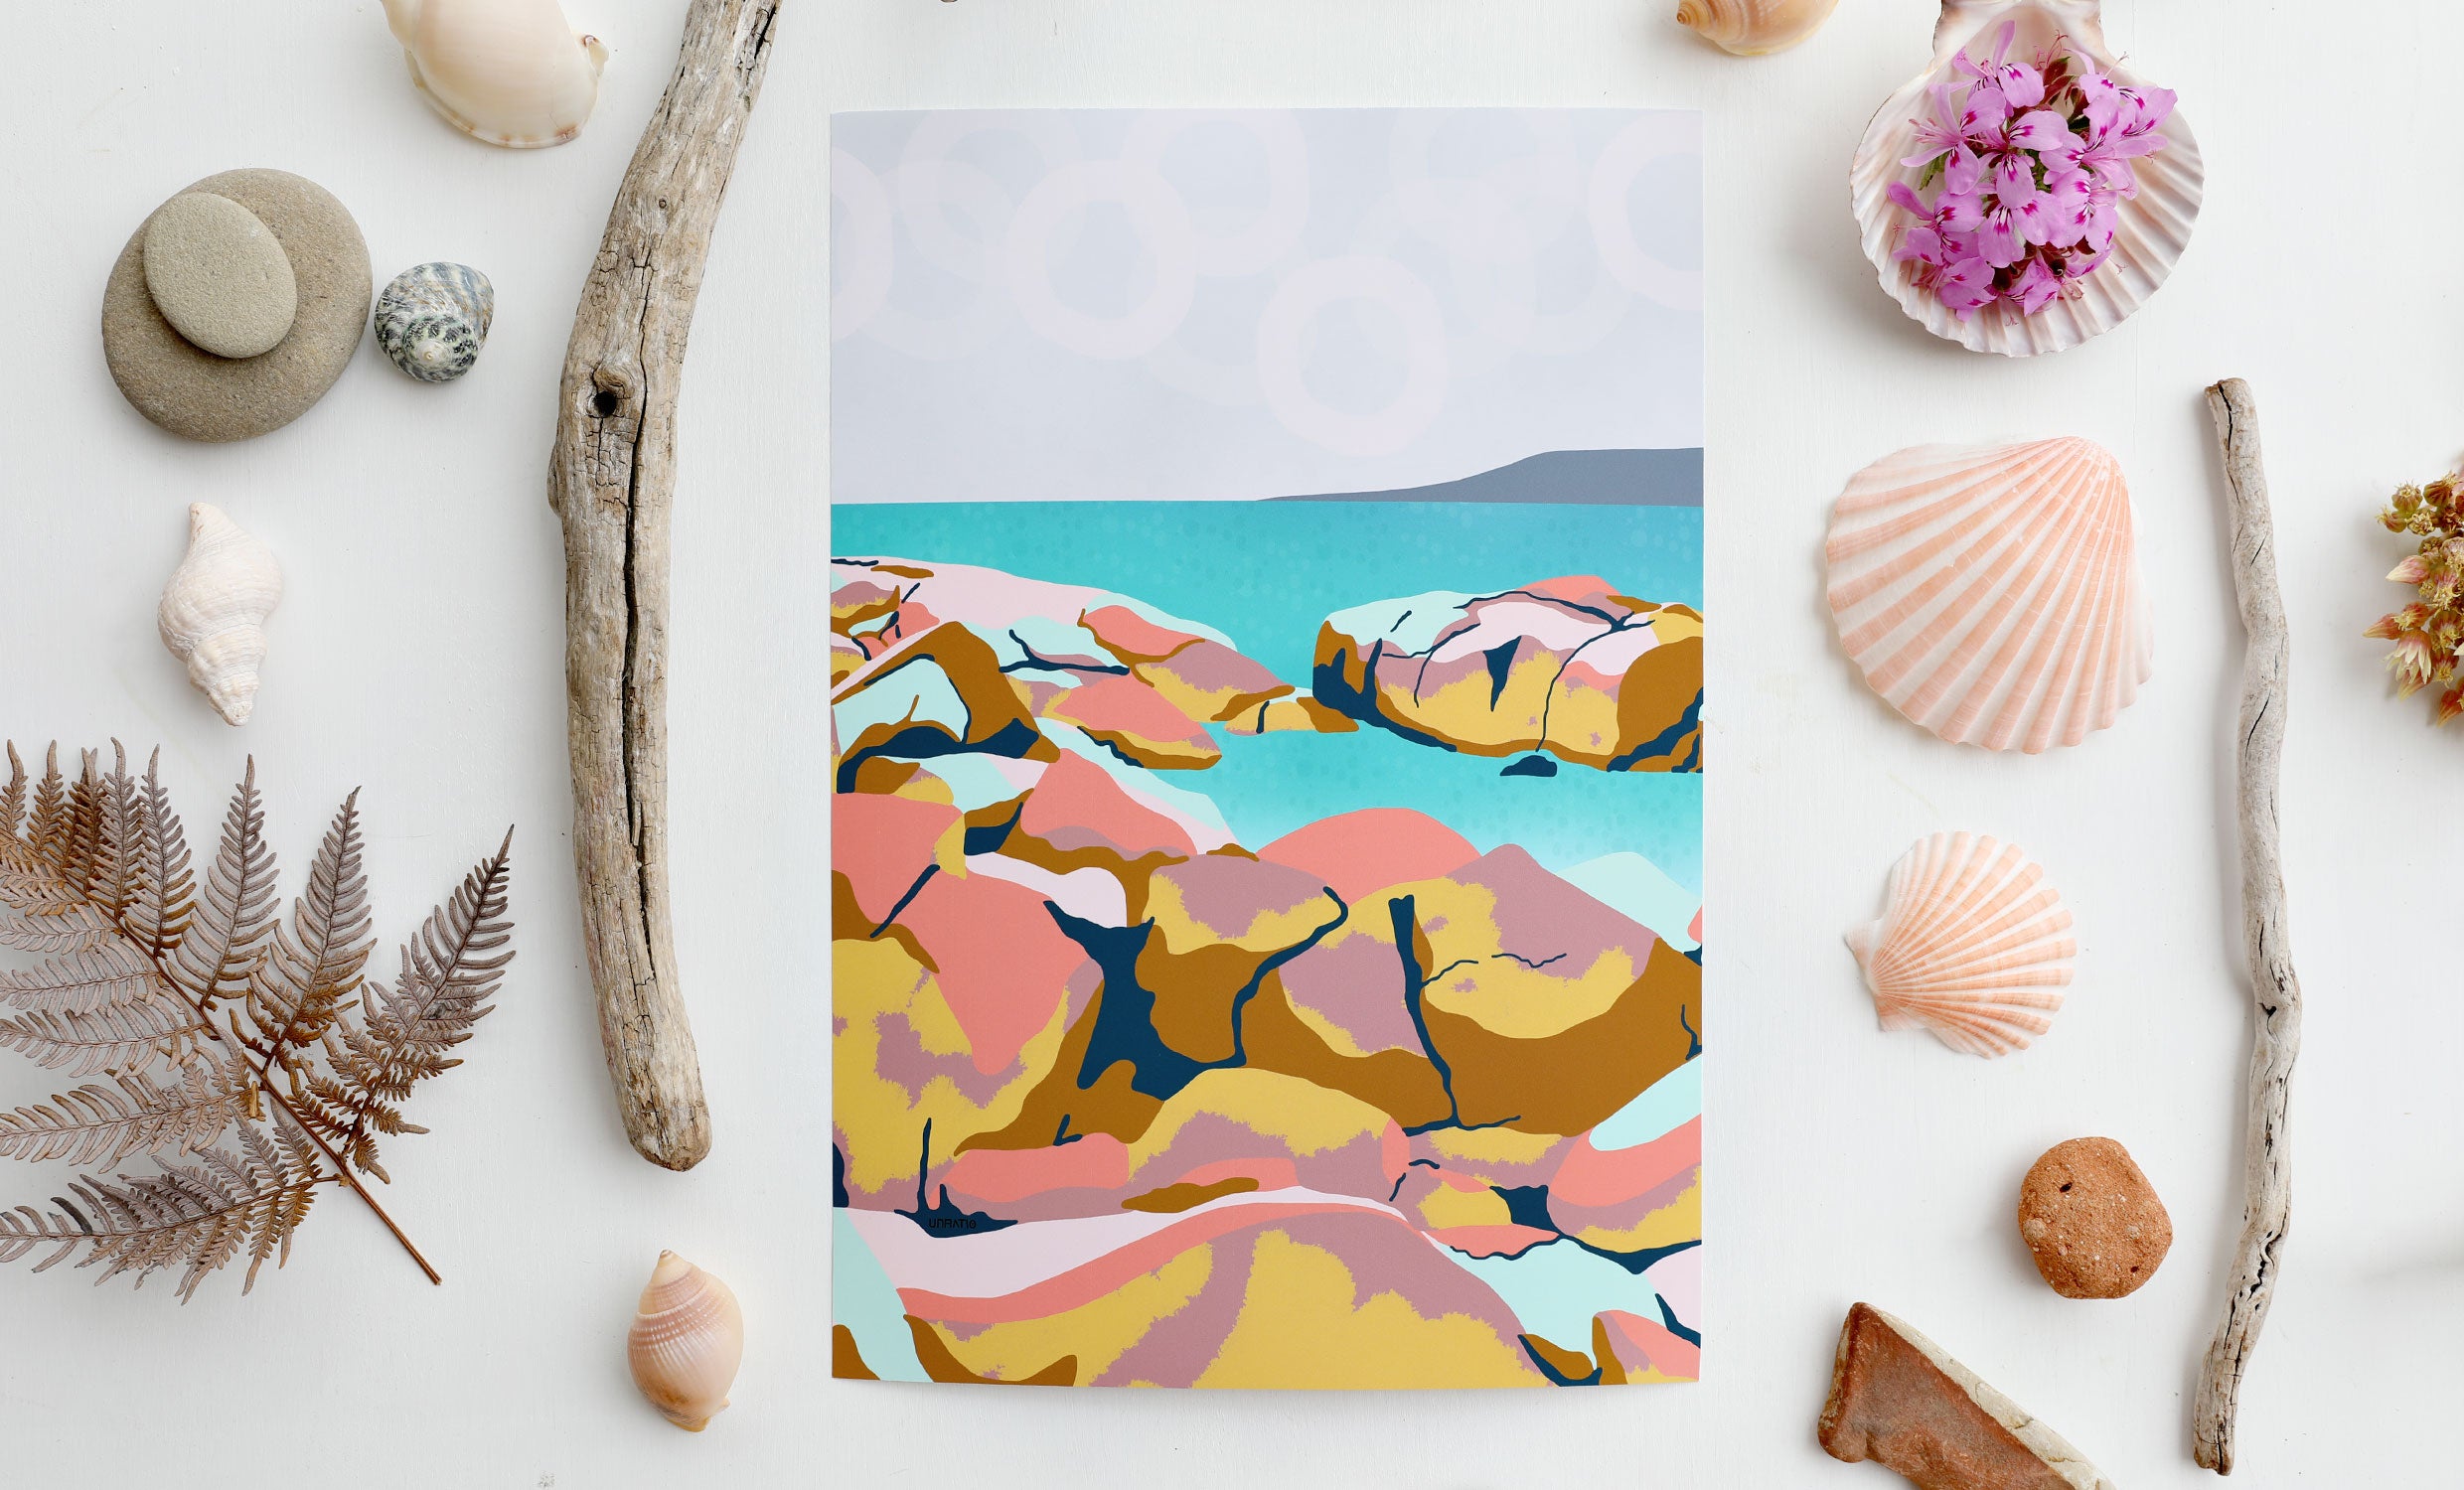 Abstract colourful beach illustration art print with a seashell nautical themed natural flatly